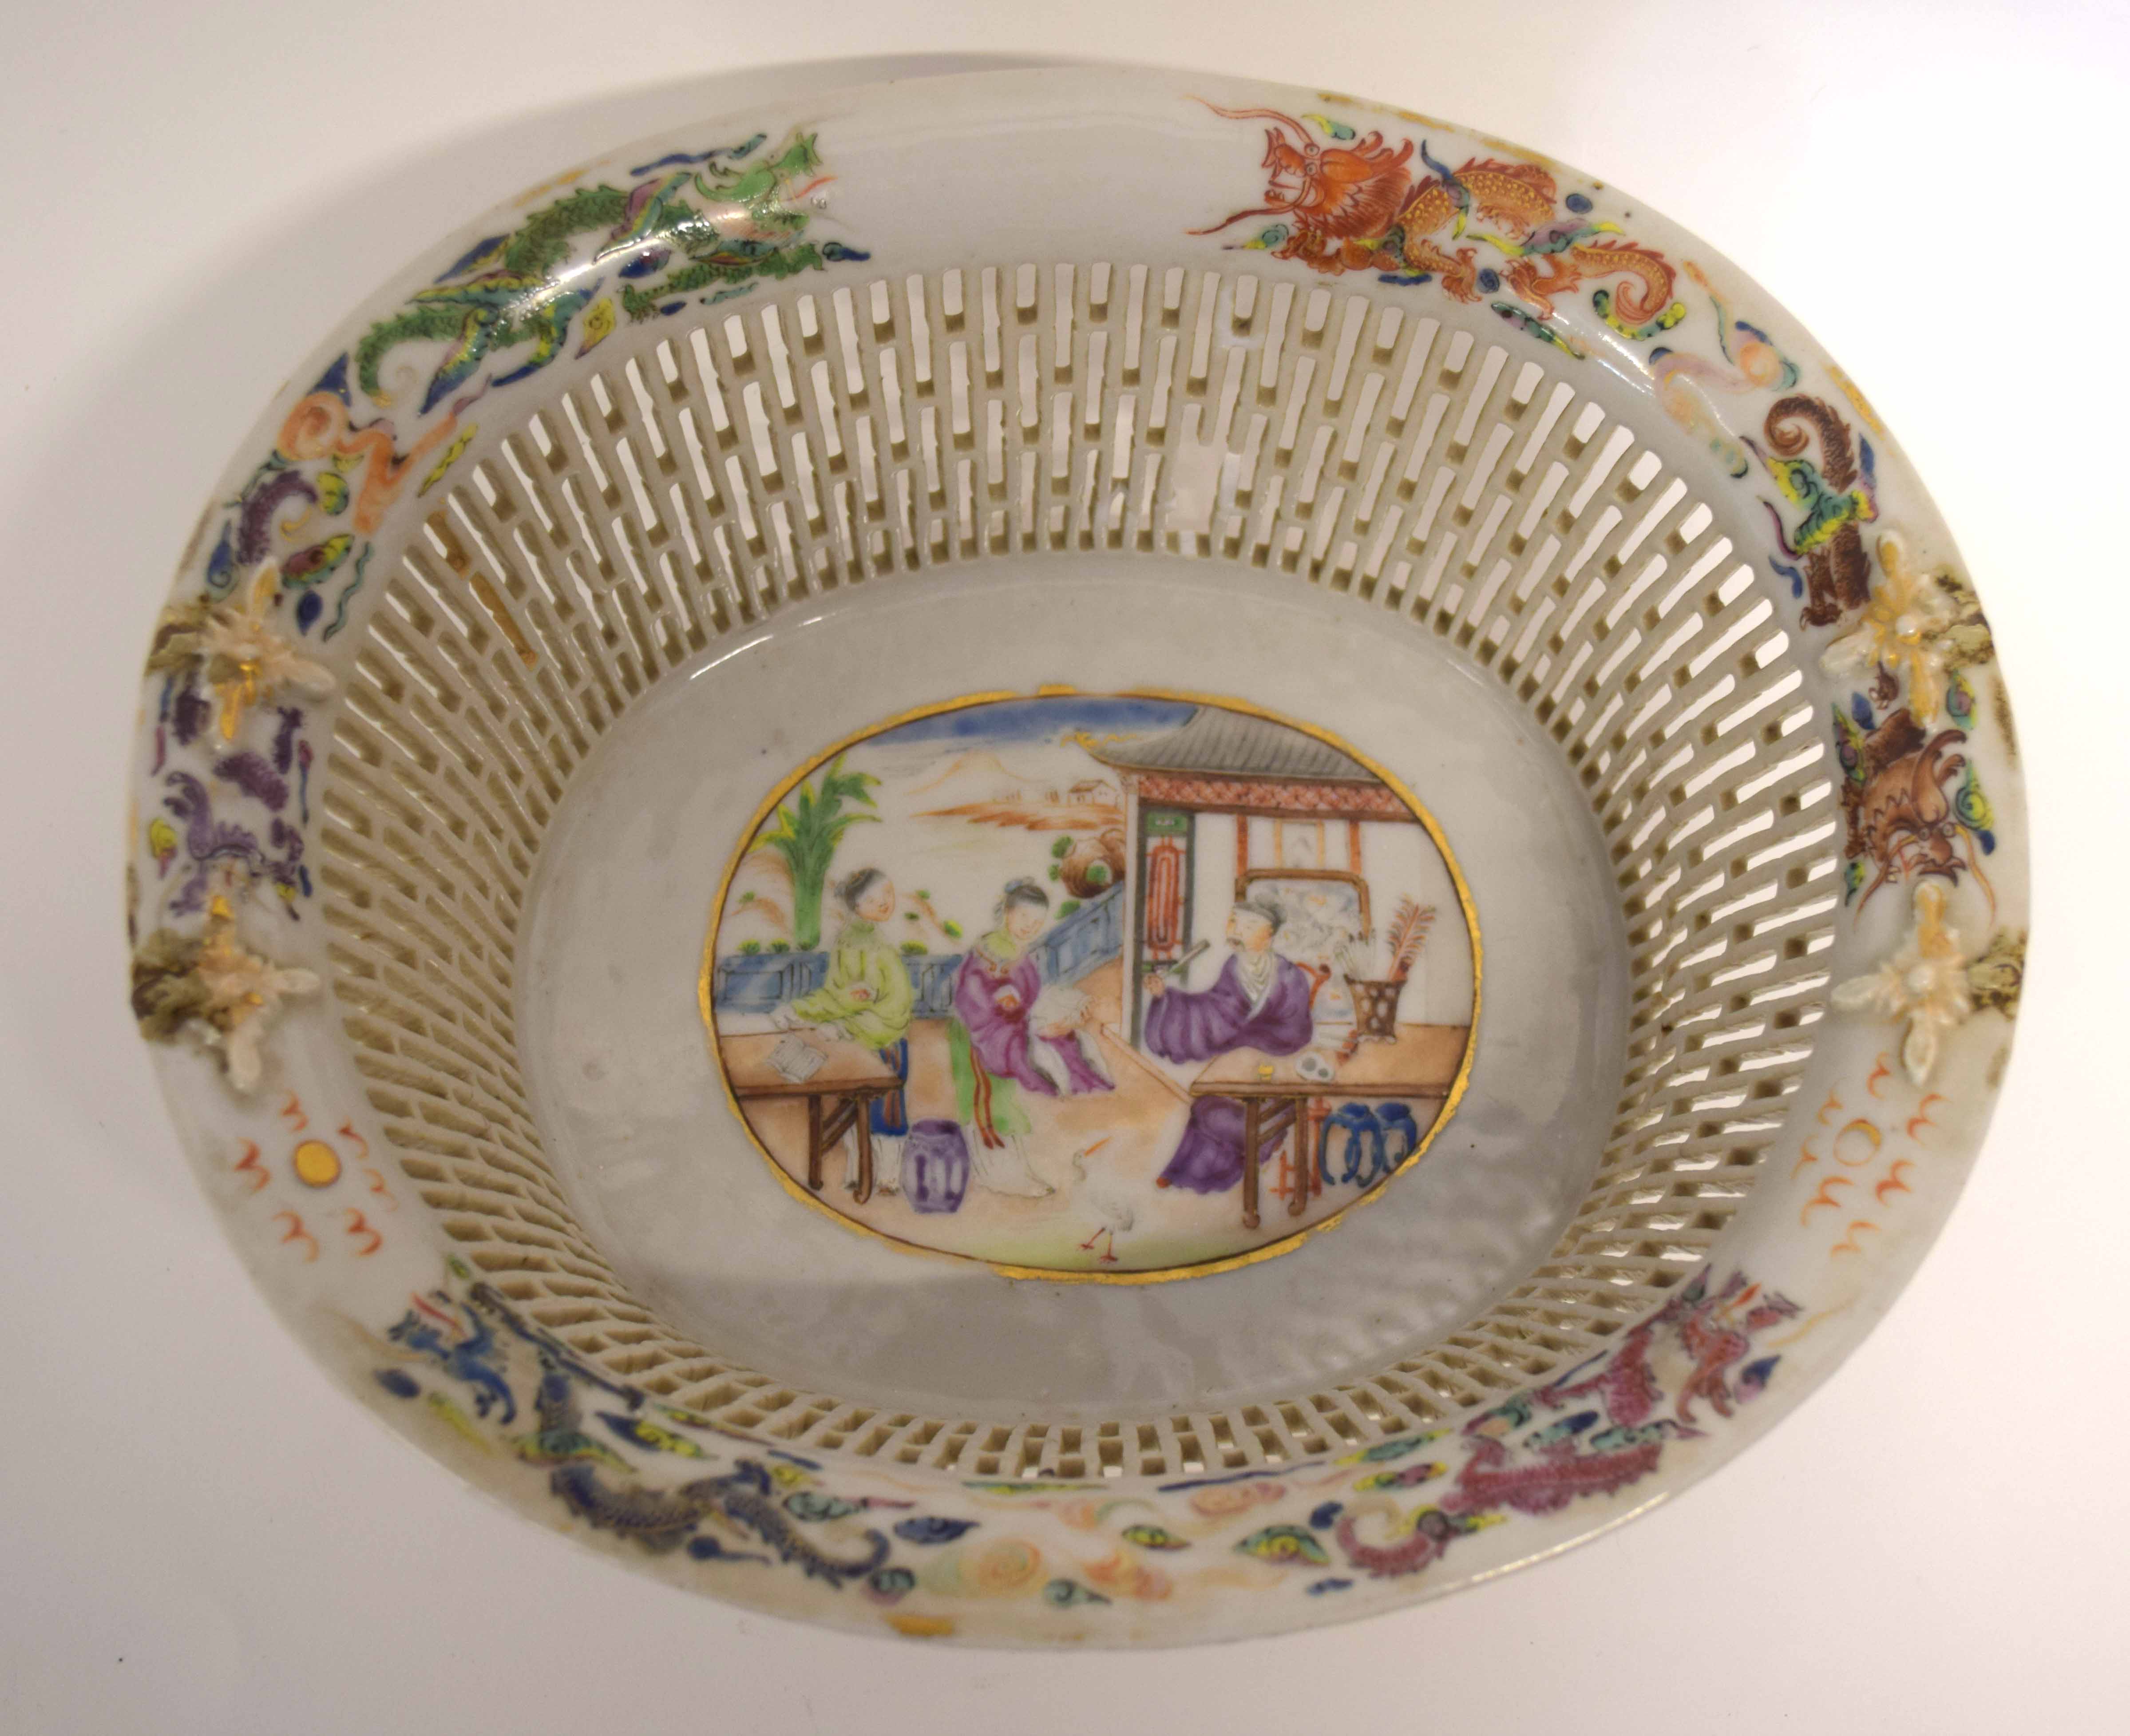 Late 18th century Chinese porcelain chestnut basket, the interior decorated in polychrome with - Image 2 of 3